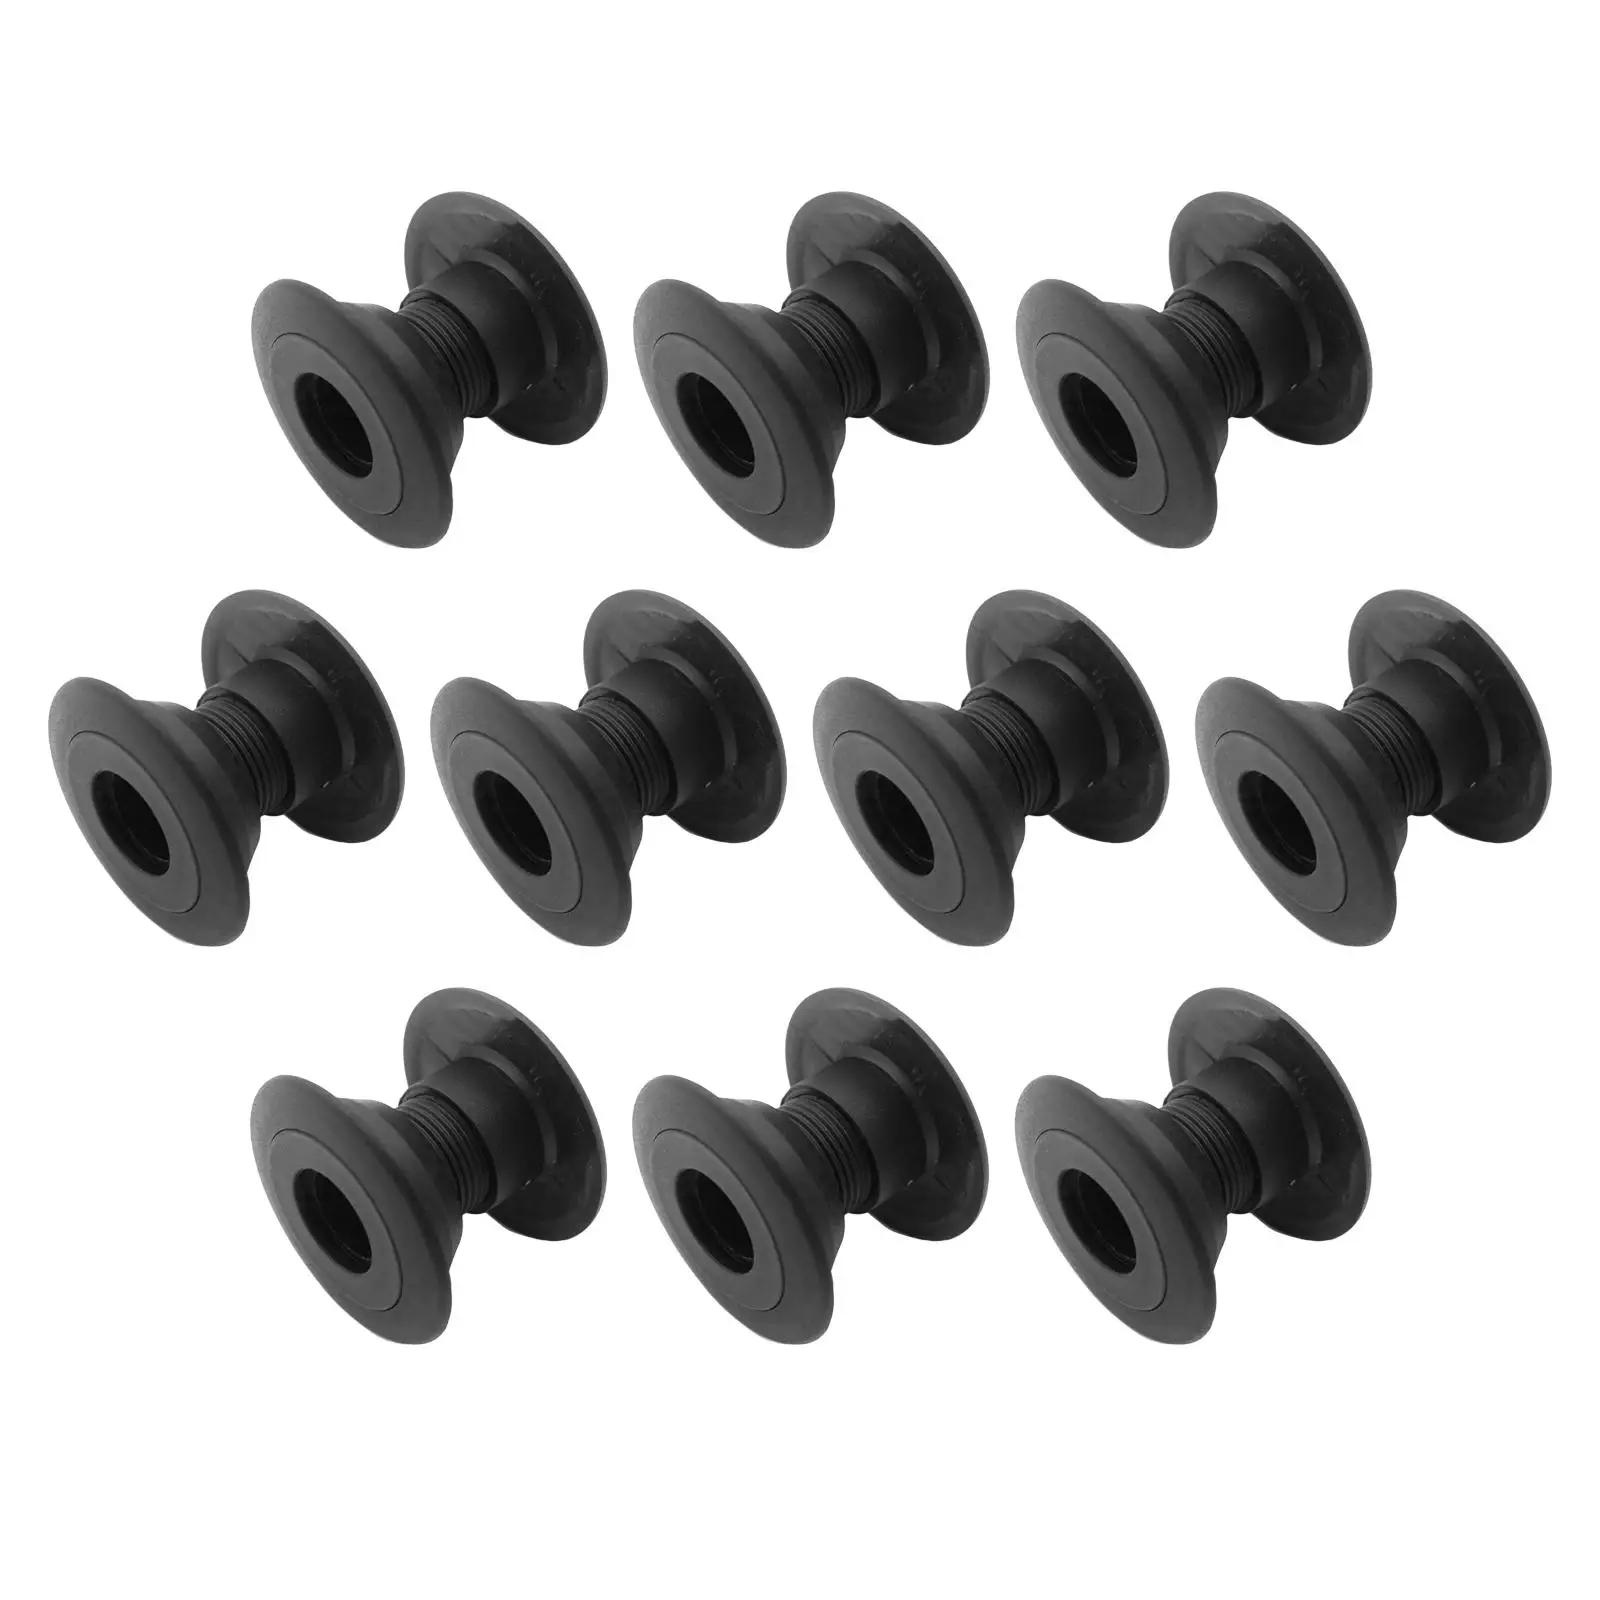 Foosball Bearing Rods for Standard Foosball Tables Durable Games Accessories